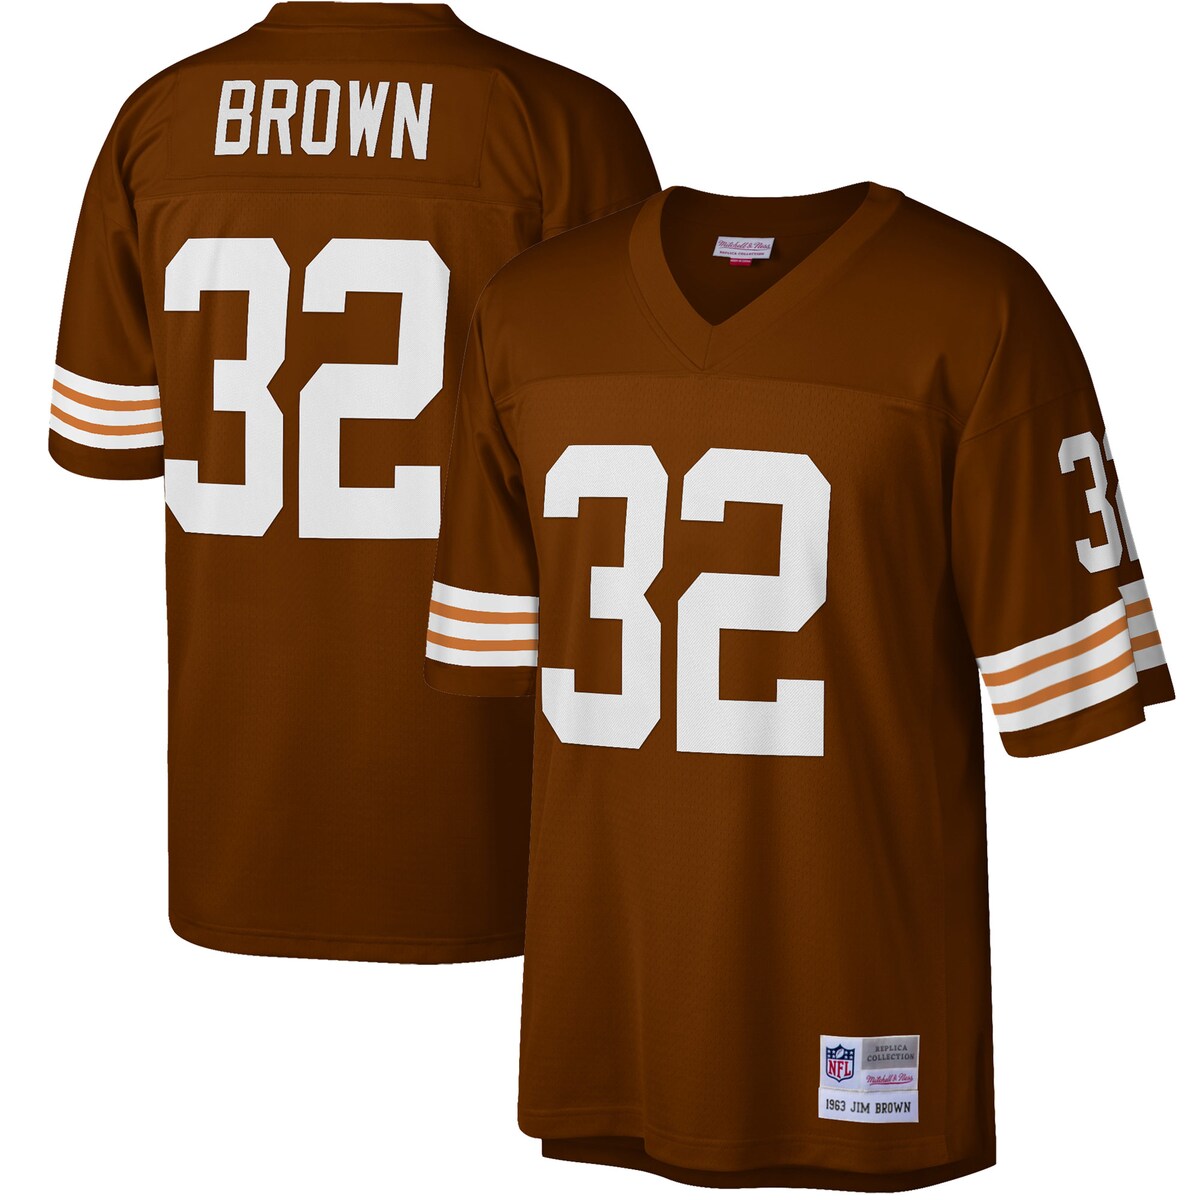 Showcase who your all-time favorite Cleveland Browns player is by sporting this Jim Brown 1963 Retired Player Replica je...